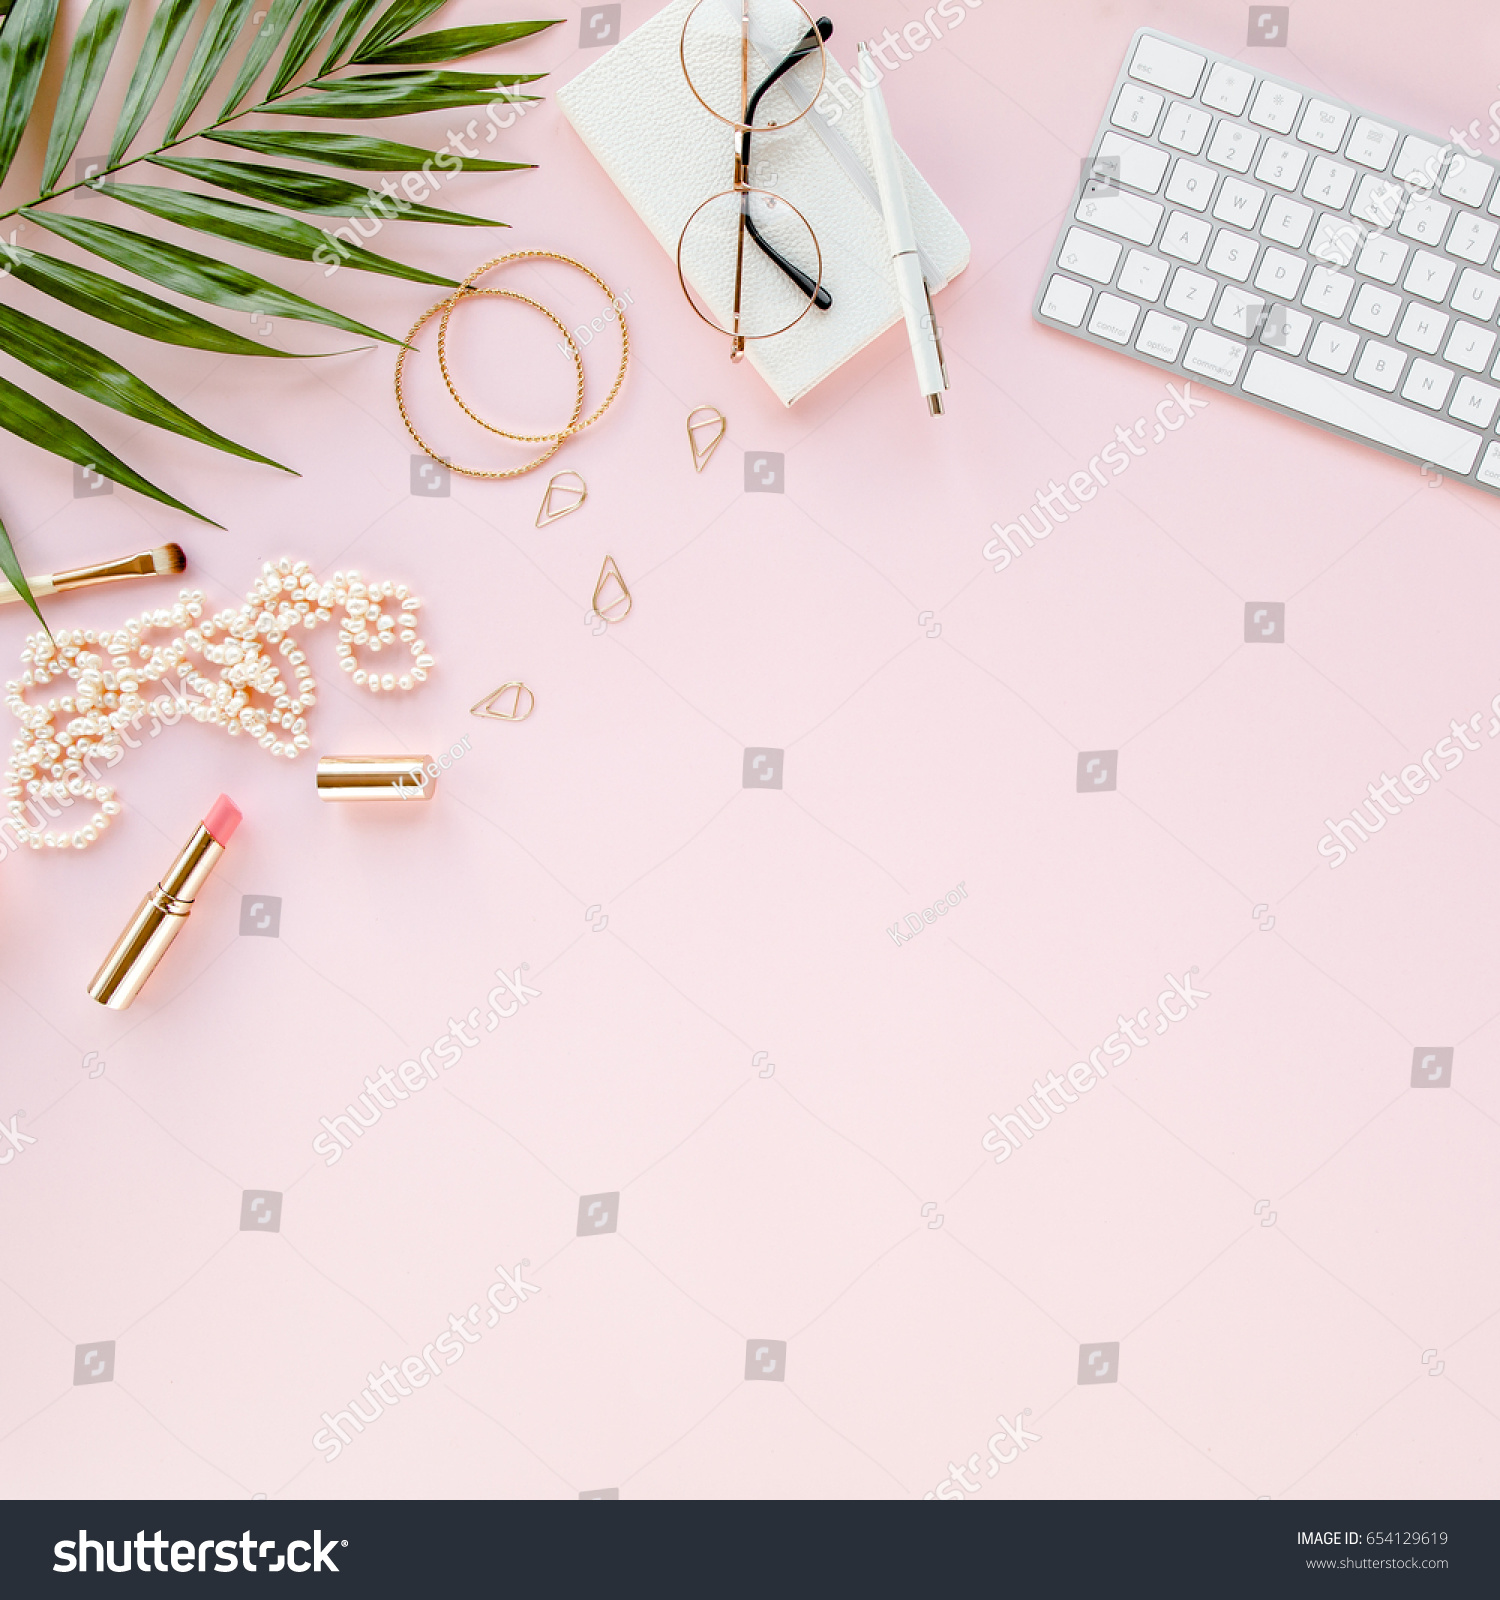 Office table desk with computer,  green leaves palm, clipboard. Magazines, social media. Top view. Flat lay. Home office workspace. Women's fashion accessories isolated on pink background.  #654129619